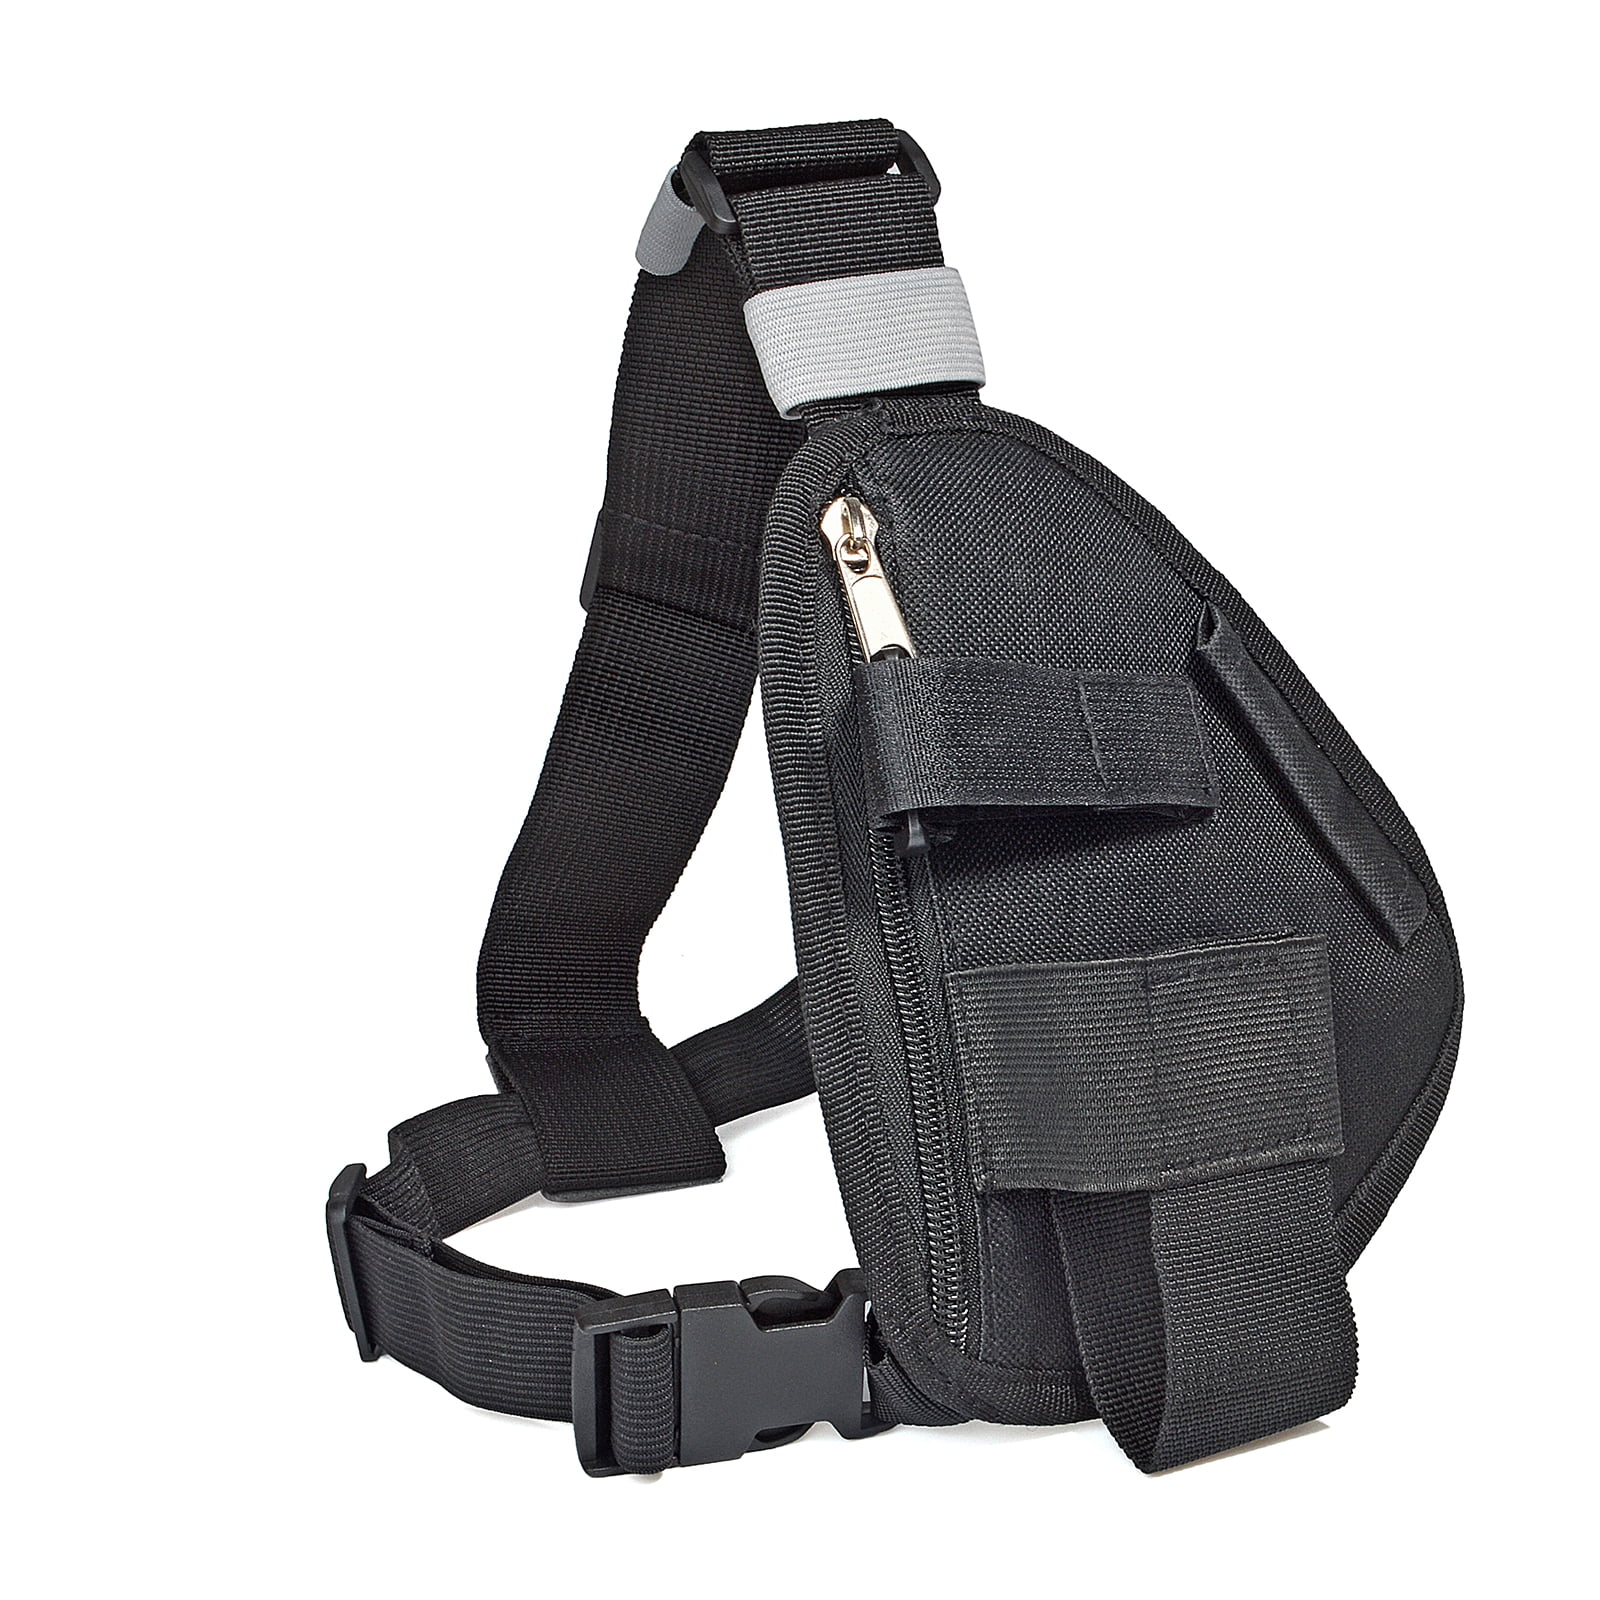 Nylon Carry Case Holster for Motorola MTS2000 Two Way Radio